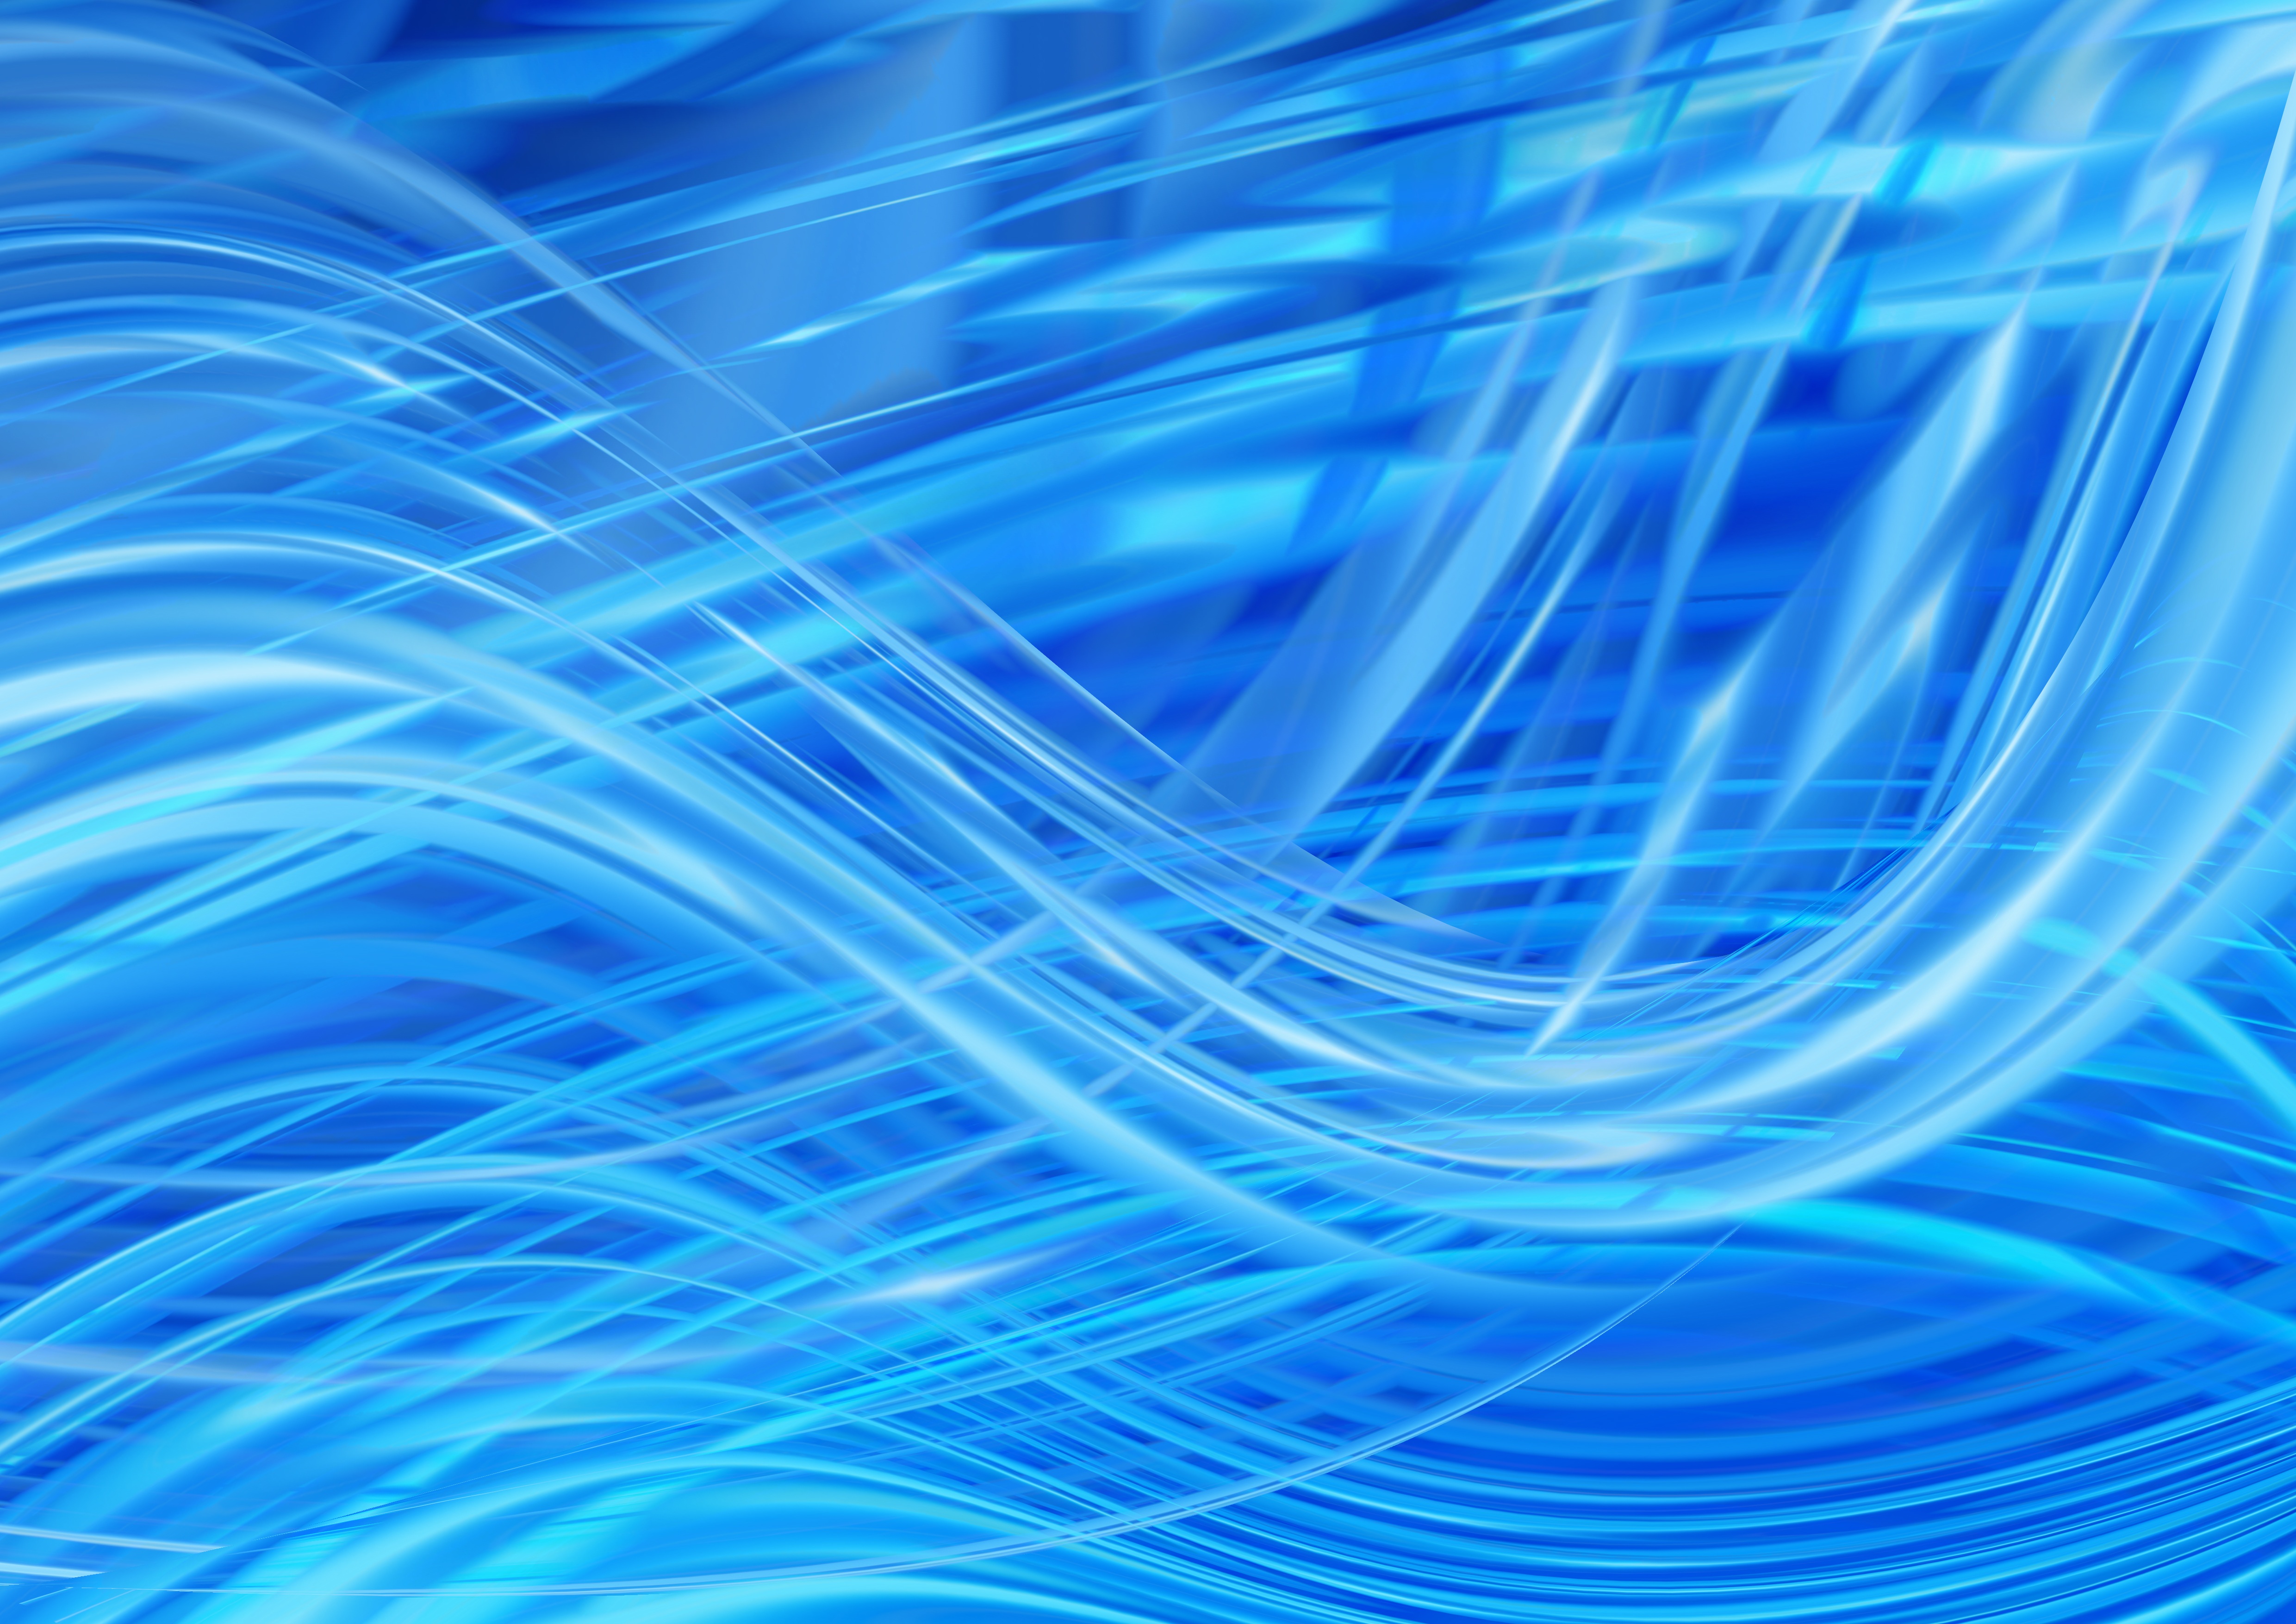 52079 download wallpaper lines, abstract, blue, wavy screensavers and pictures for free